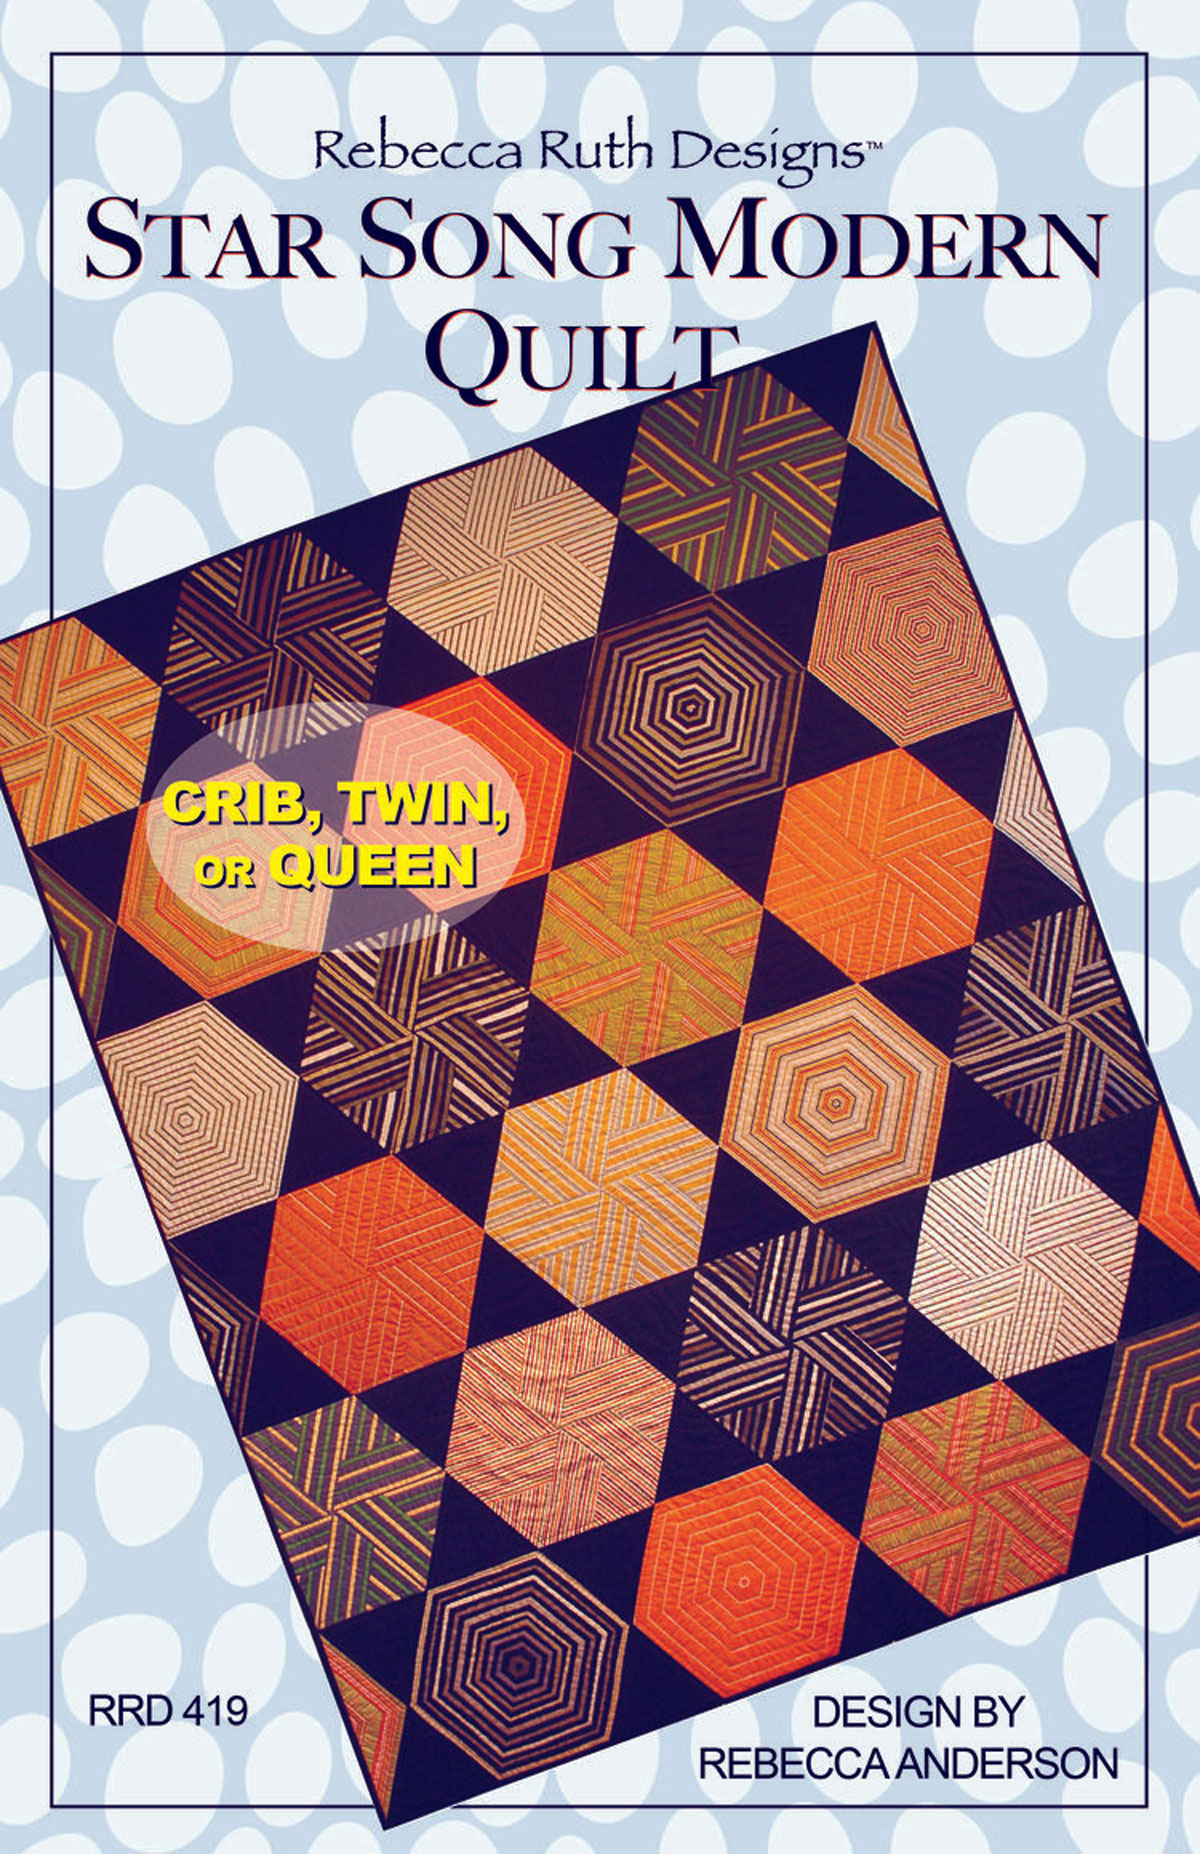 Star-Song-Modern-quilt-sewing-pattern-rebecca-ruth-designs-front